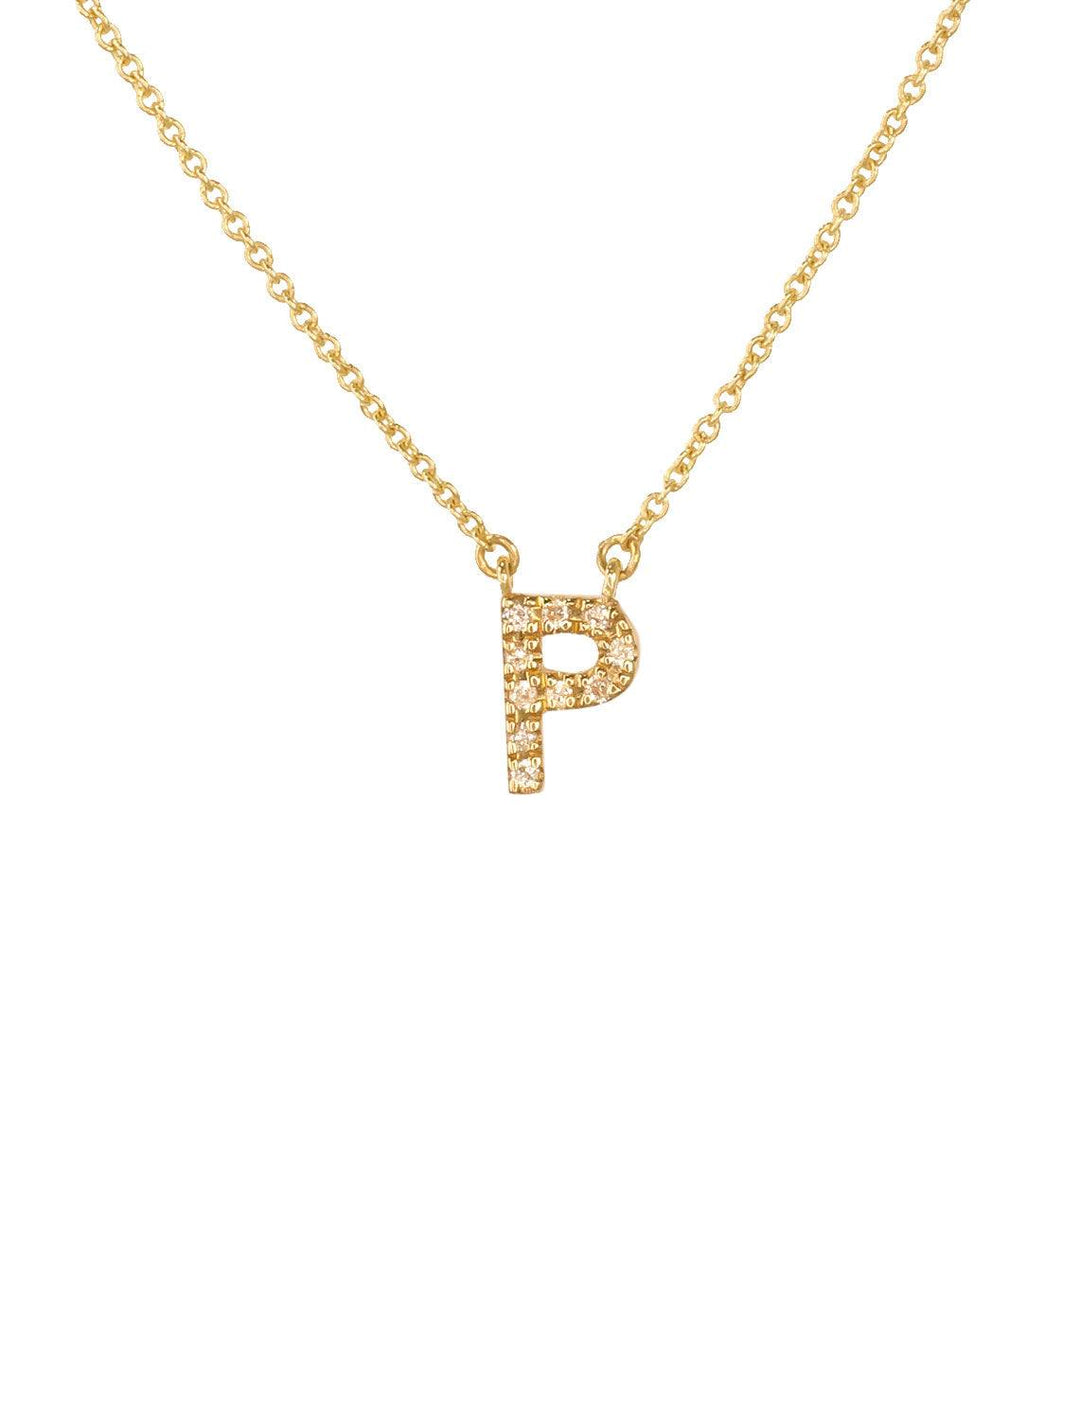 diamond and 14k initial P necklace